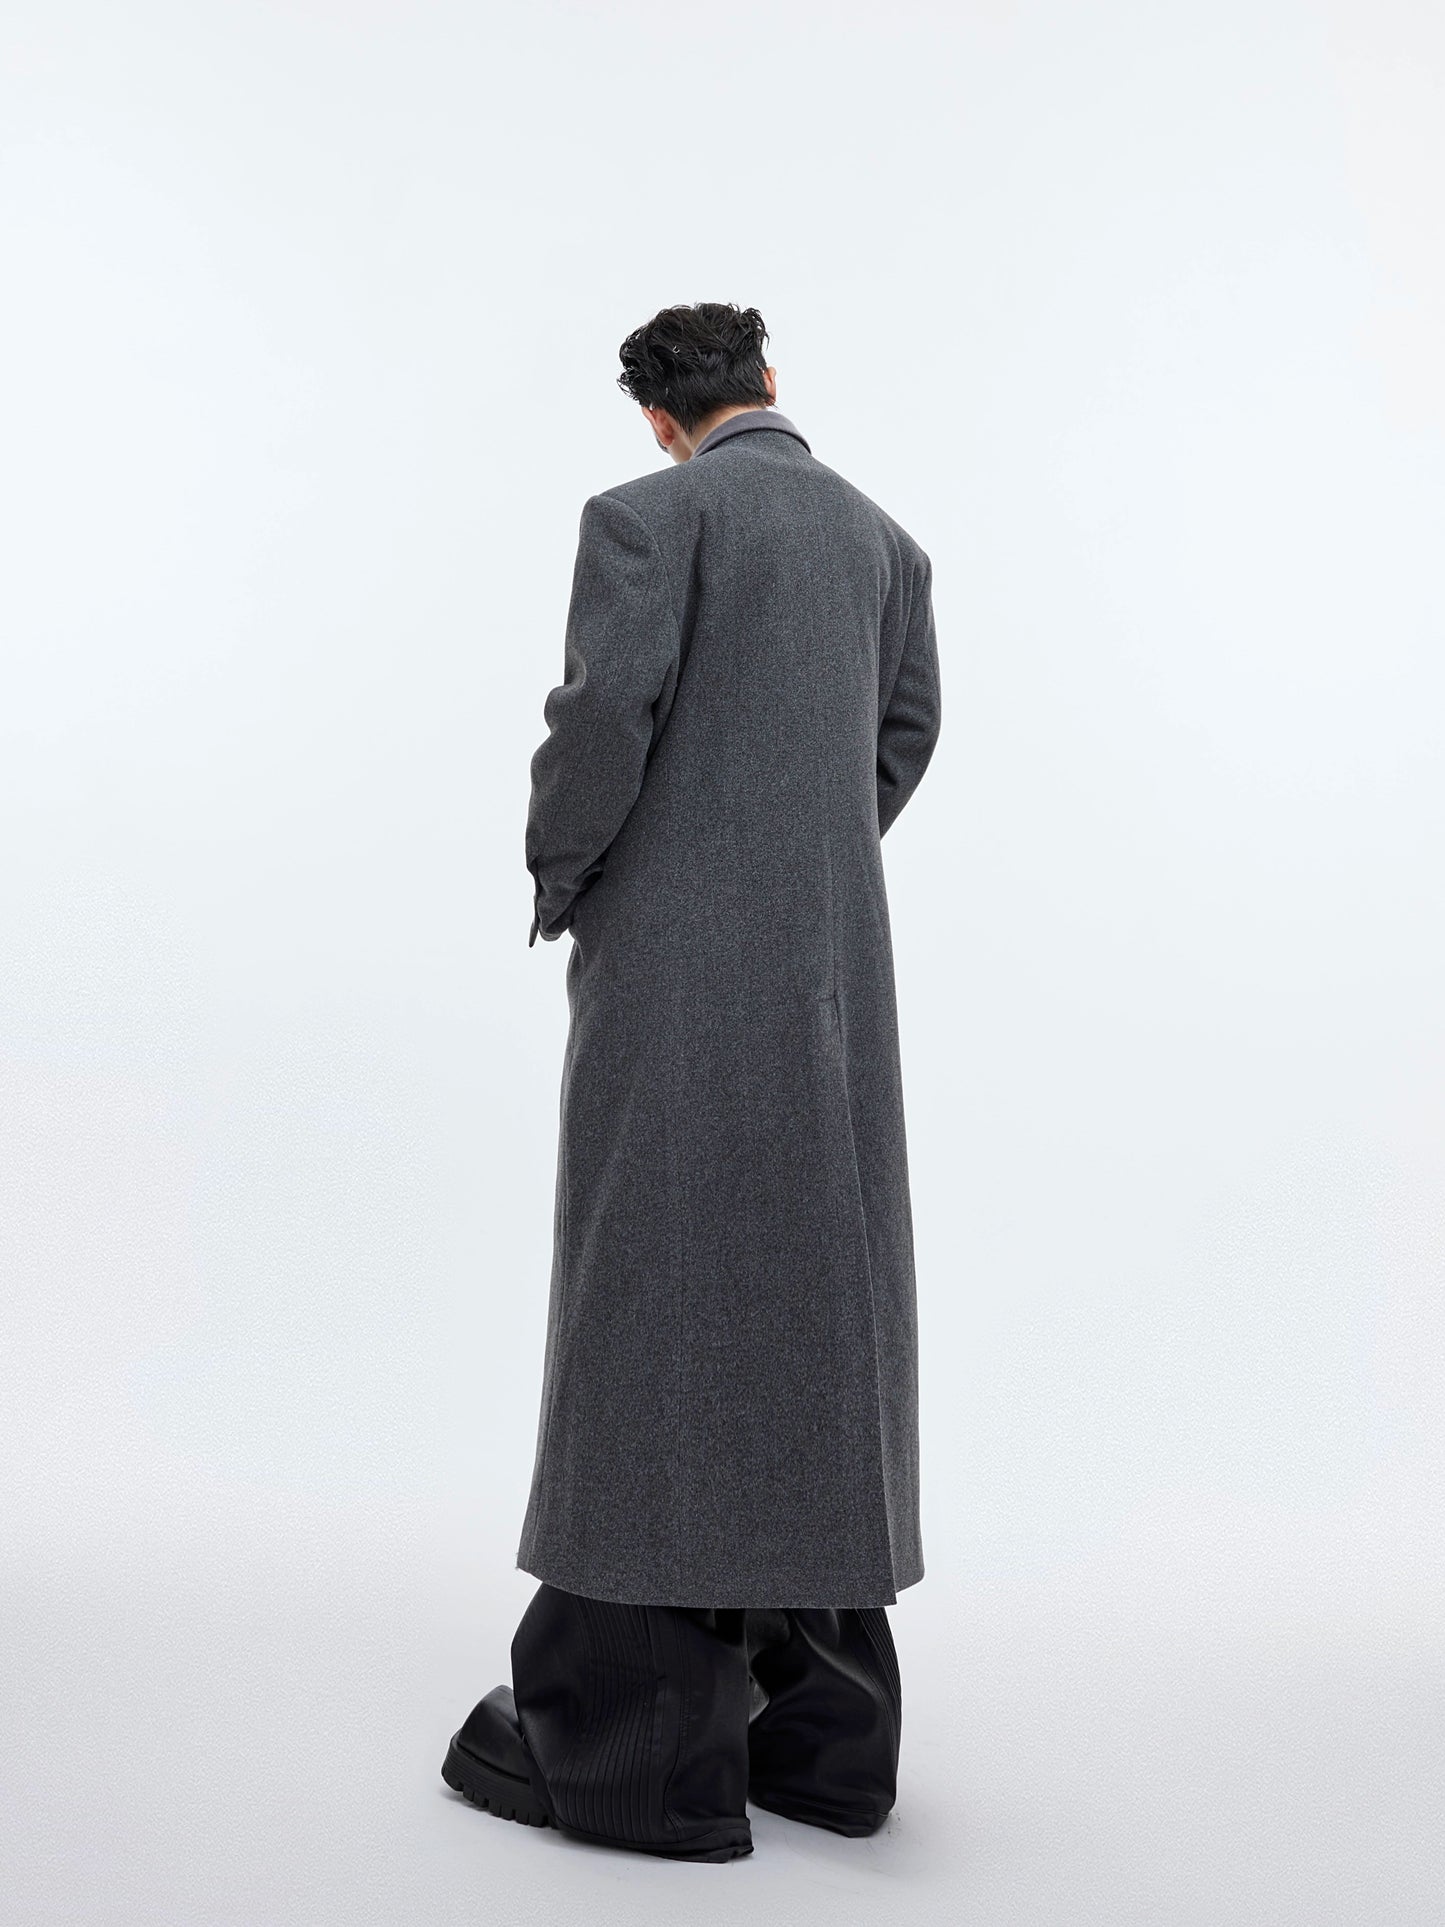 CulturE niche deconstructs the waist-cinching silhouette of a woolen coat with metal buckles and a long over-the-knee tweed jacket